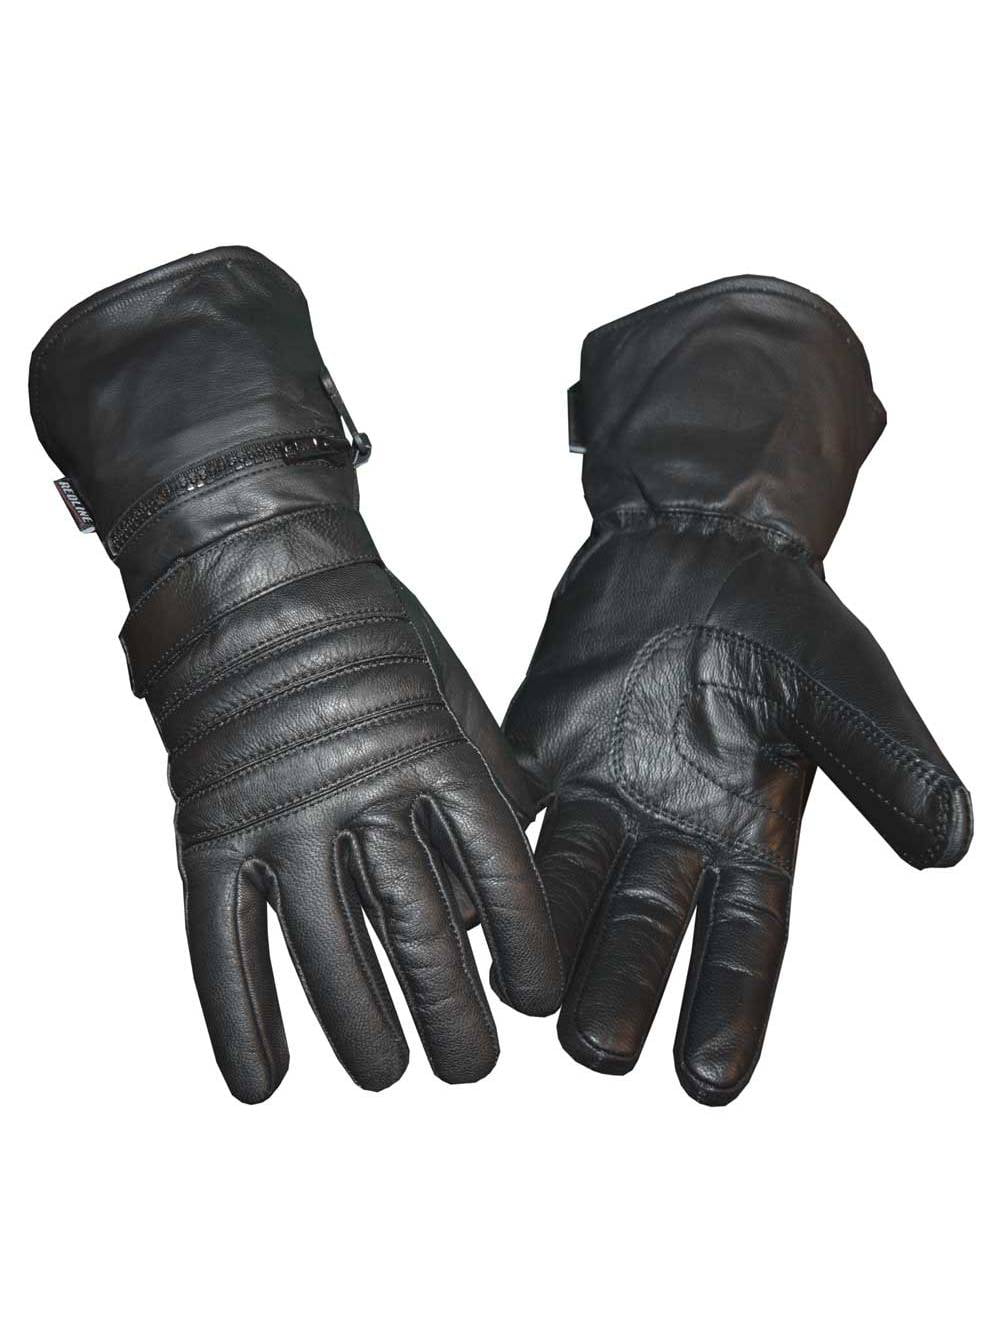 Motorcycle Leather Gauntlet Riding Gloves With Rain Cover XL 